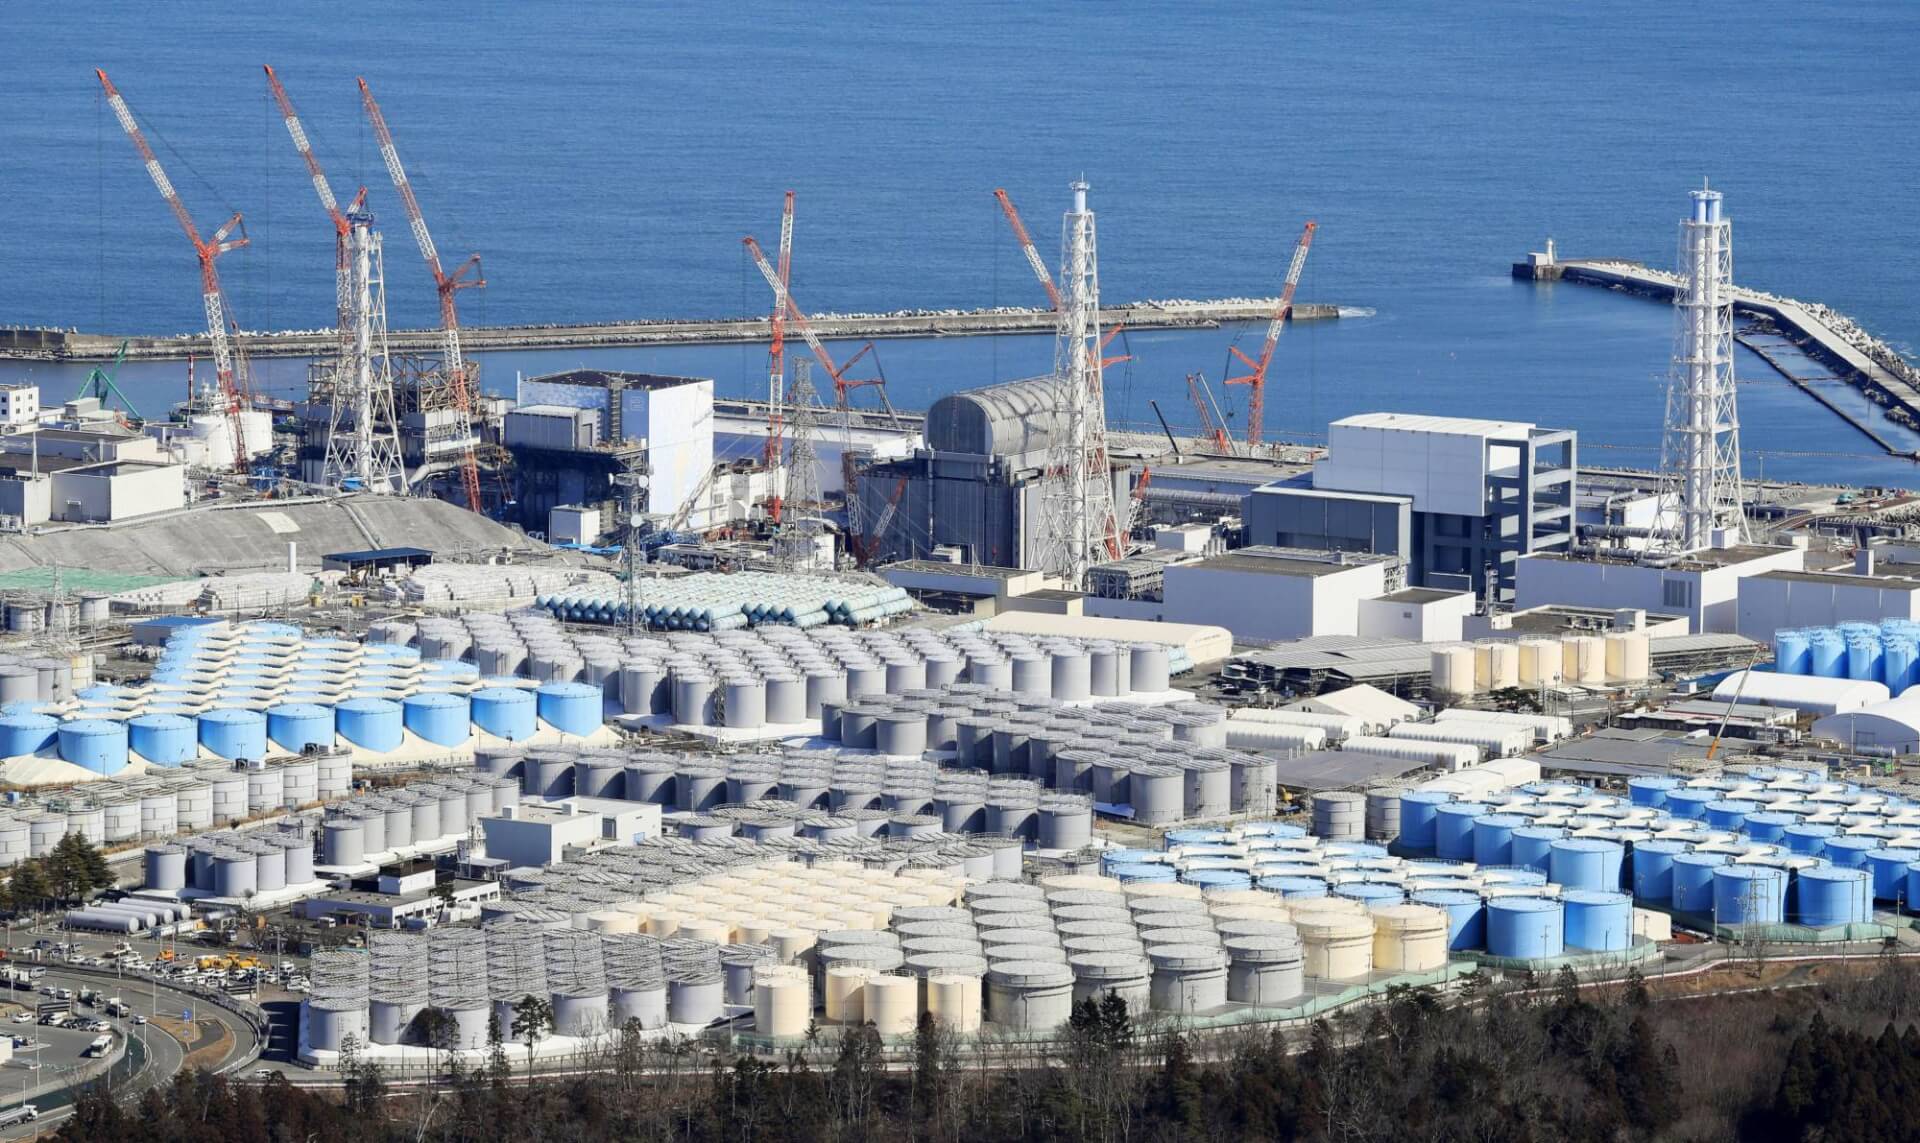 Japan’s Release of Radioactive Wastewater from Fukushima Isn’t as Concerning as it Appears